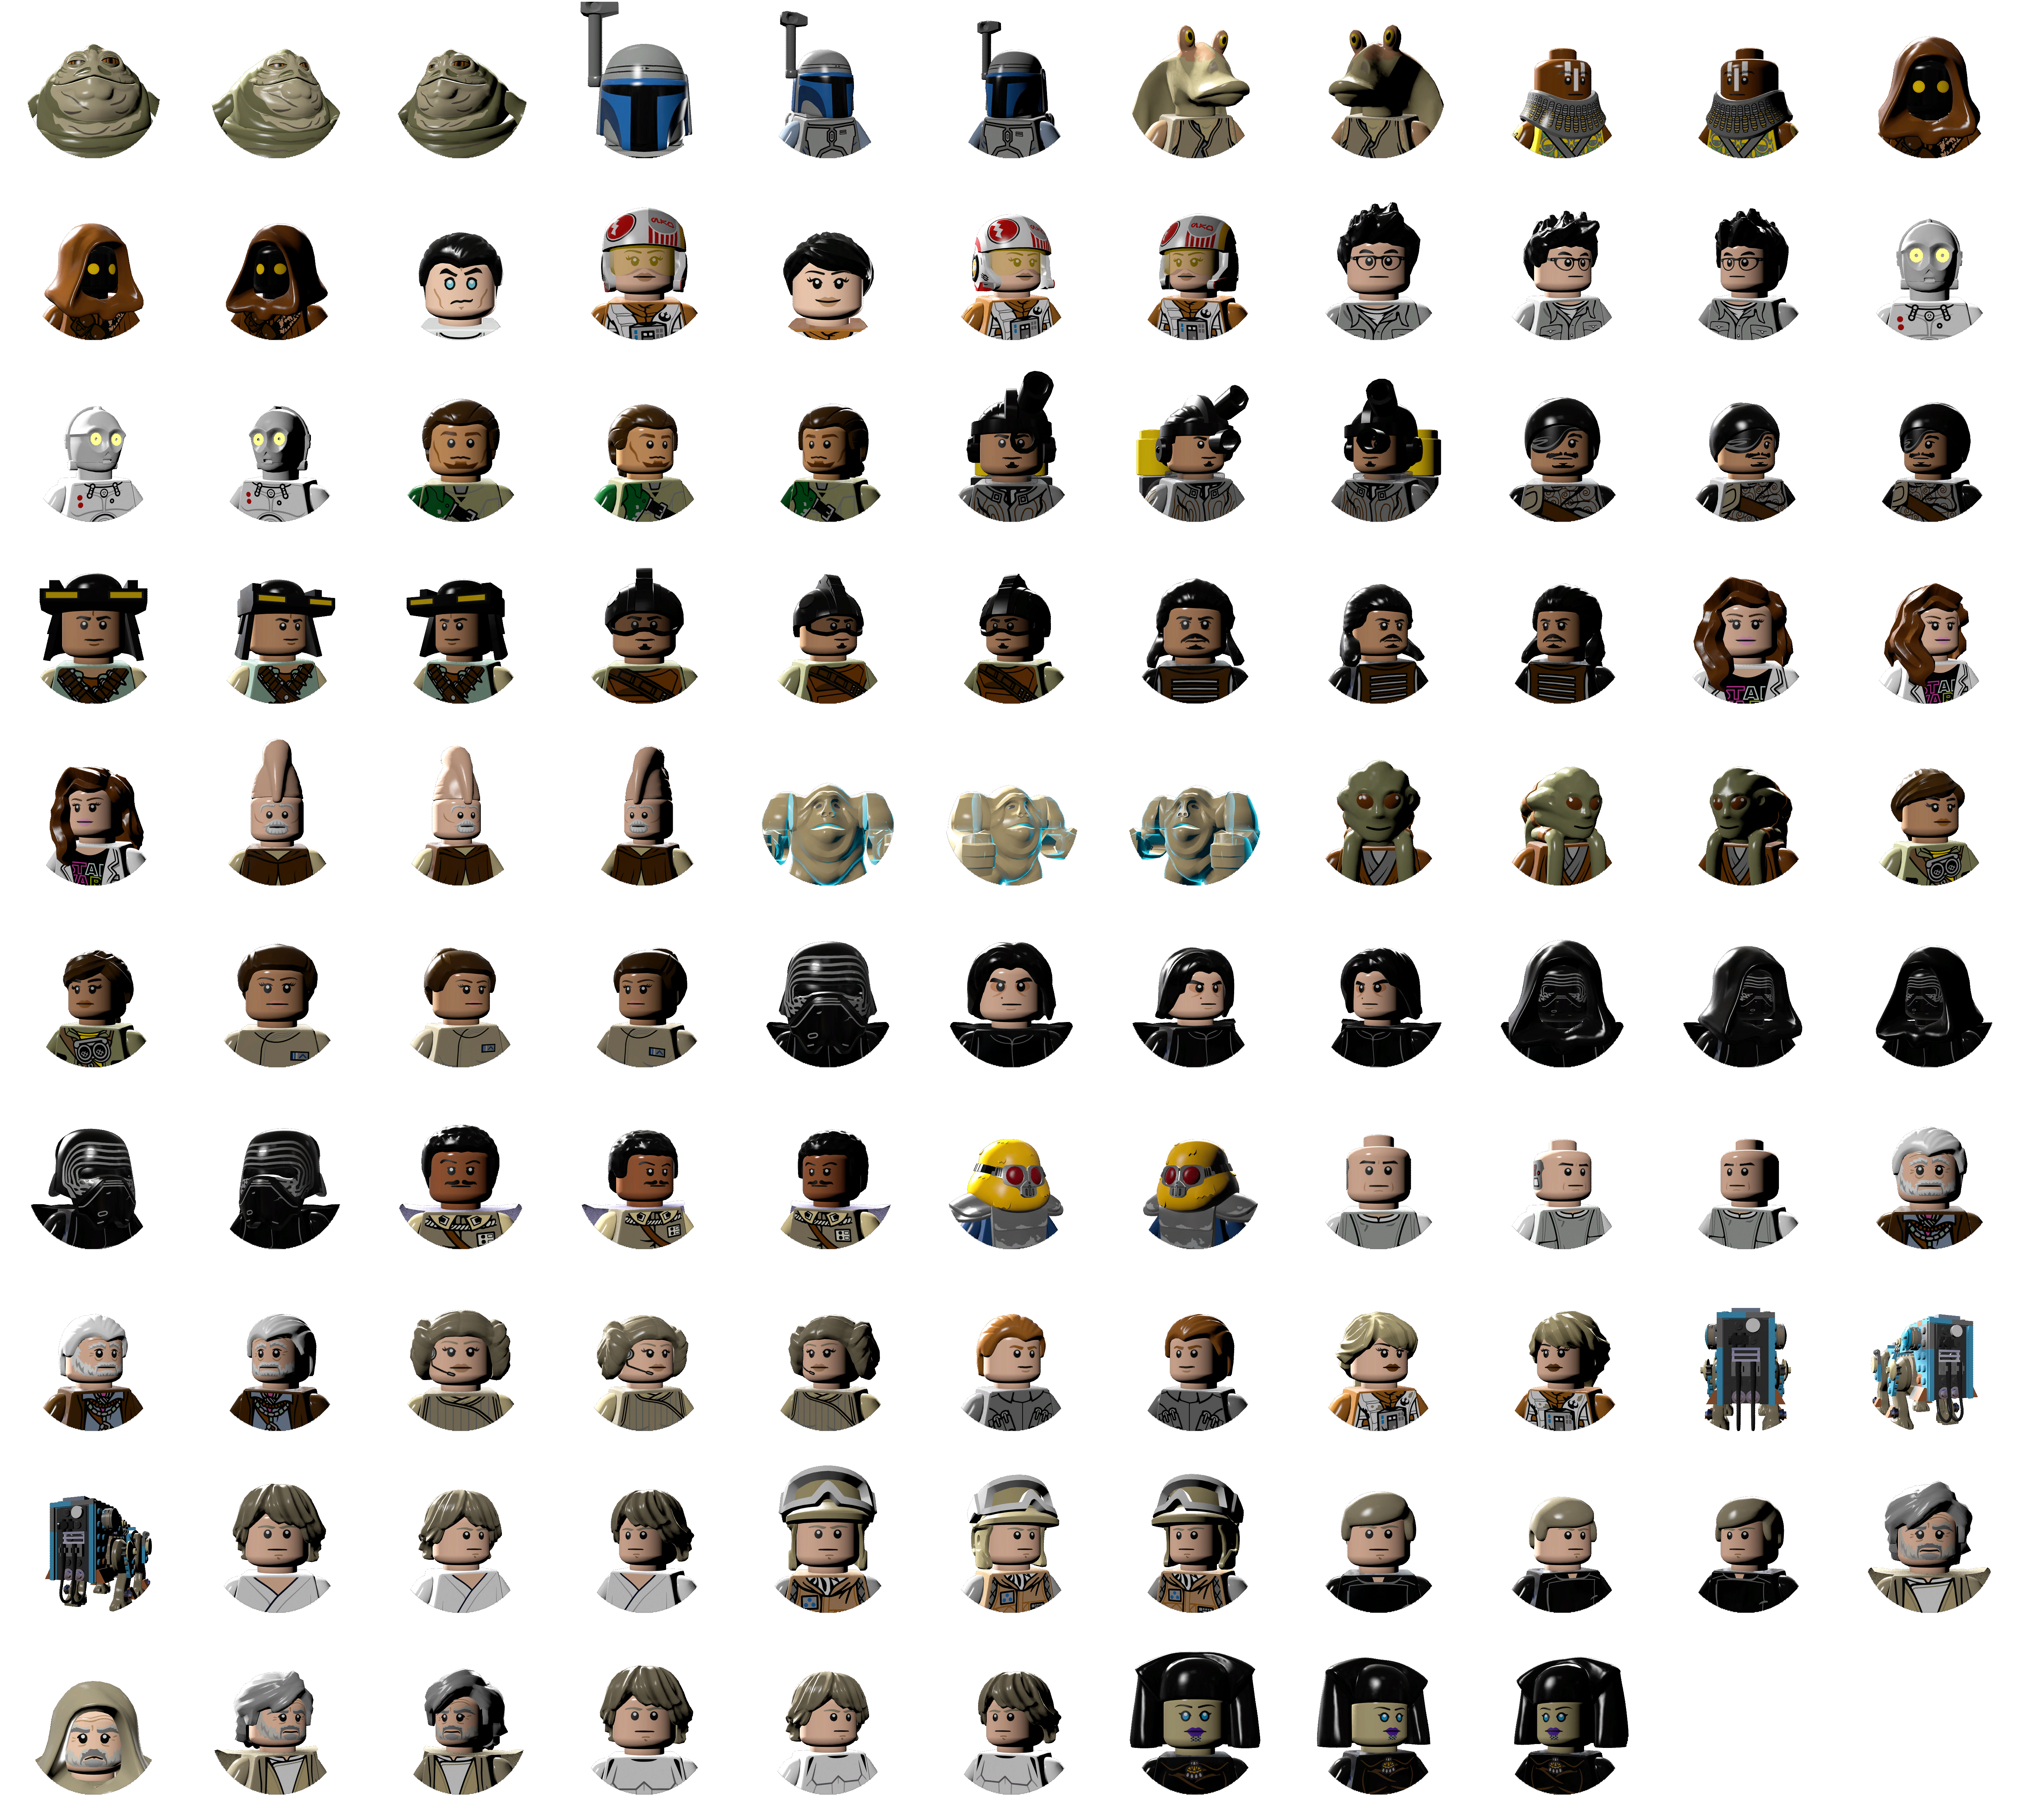 LEGO Star Wars: The Force Awakens - Character Icons (J-L)